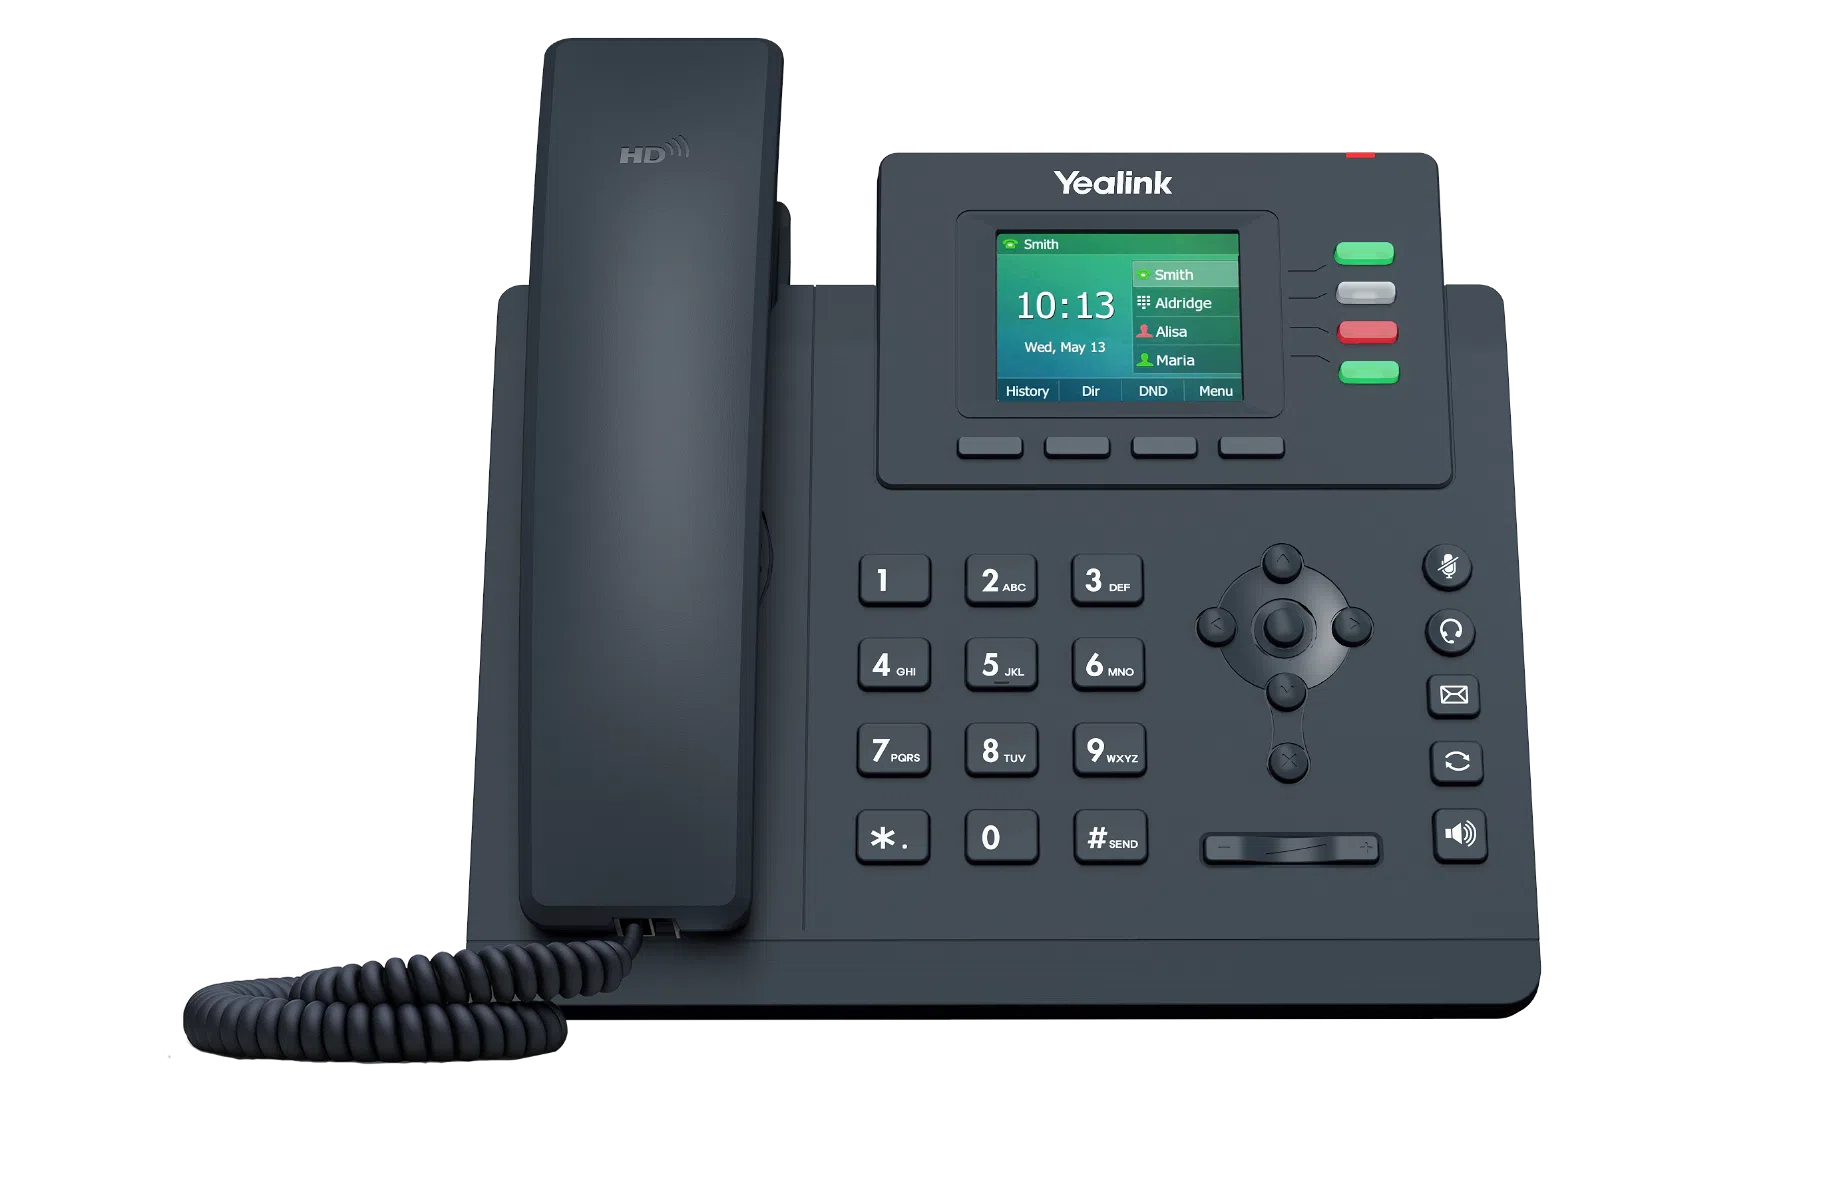 What is the 'conf' key function on my Yealink T33G IP phone?